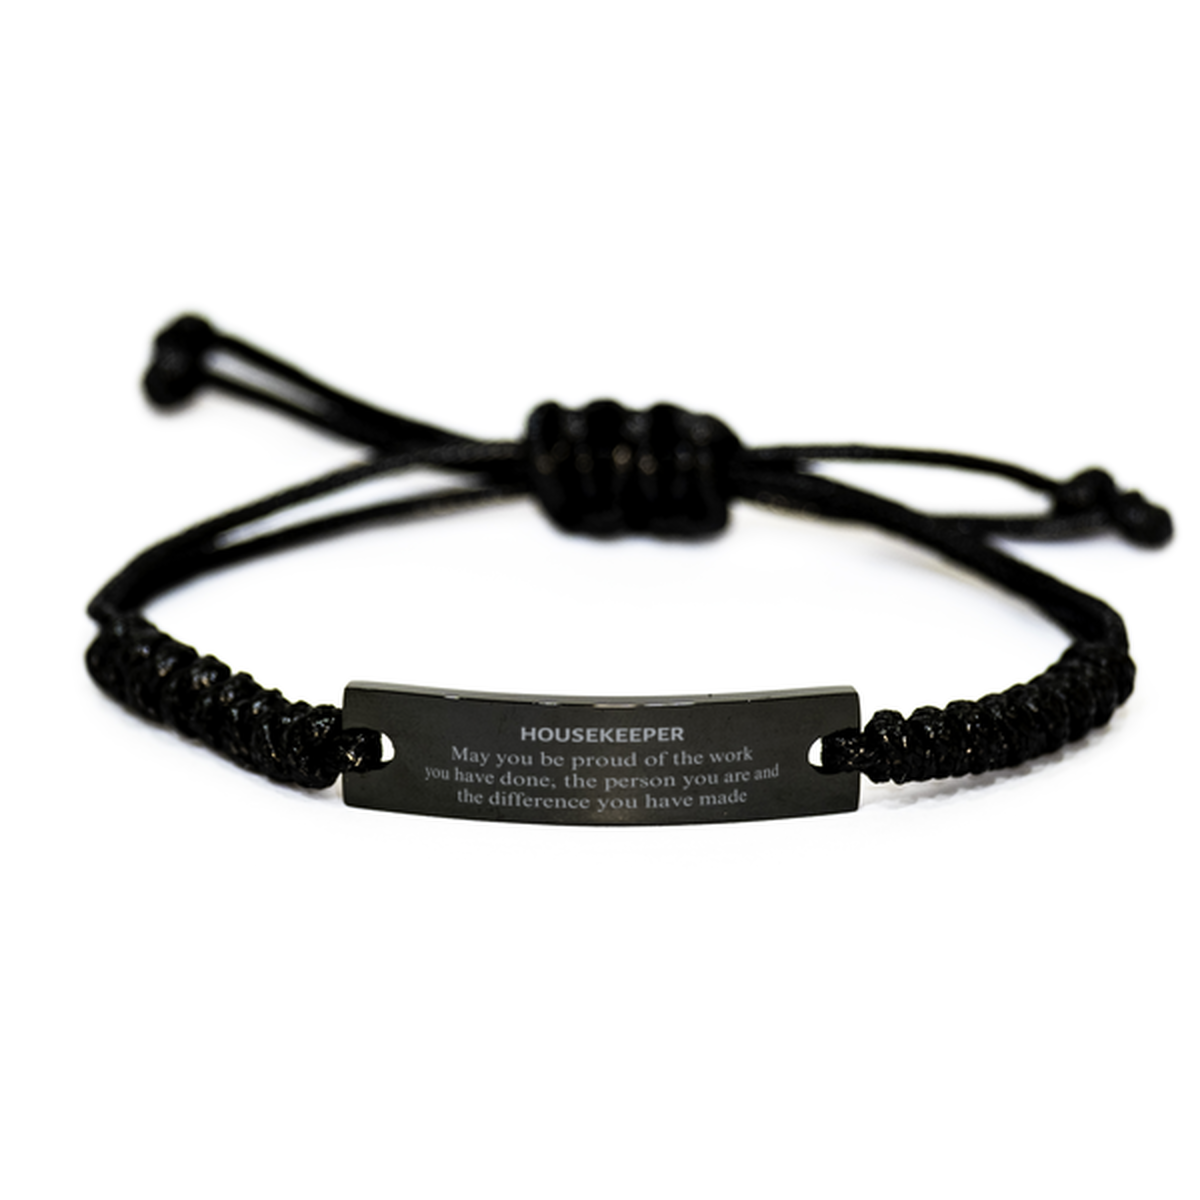 Housekeeper May you be proud of the work you have done, Retirement Housekeeper Black Rope Bracelet for Colleague Appreciation Gifts Amazing for Housekeeper